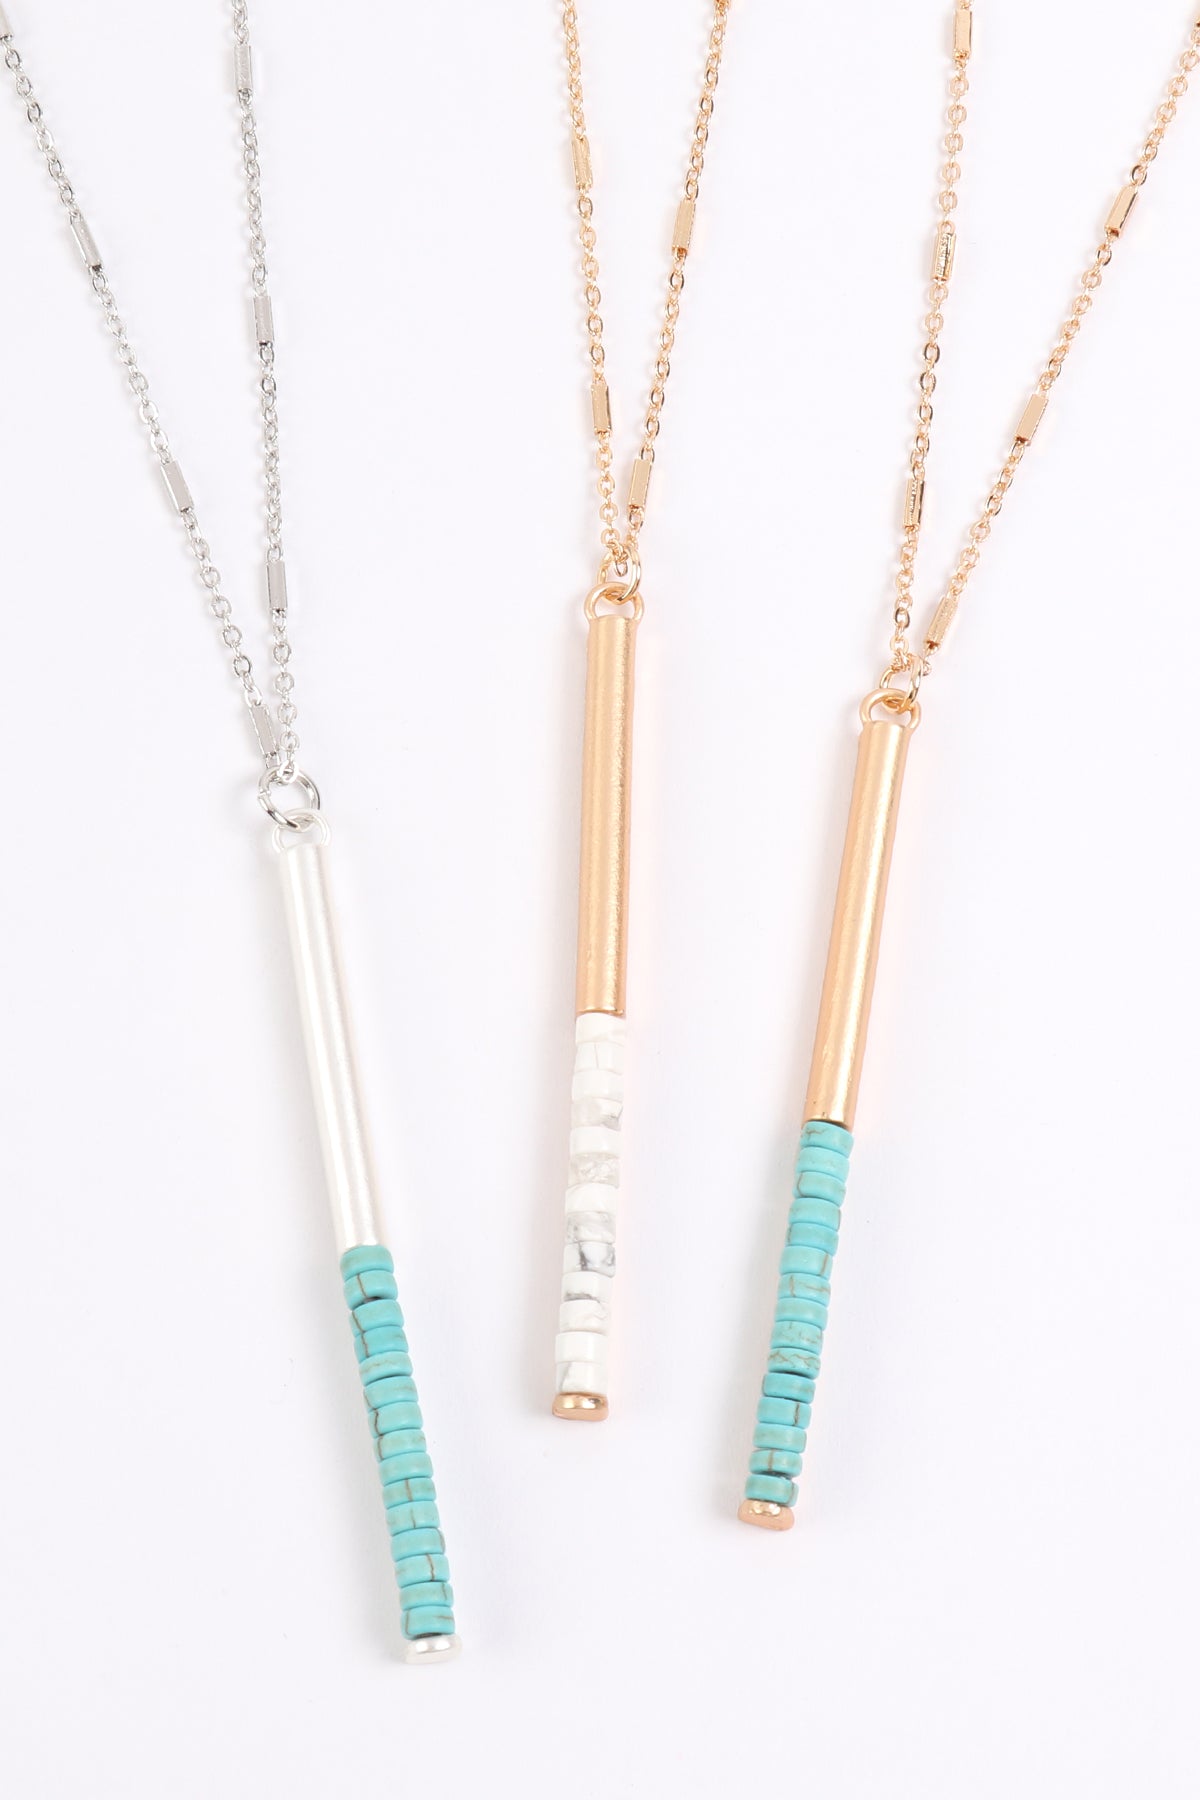 ROUND BAR W/ BEADS PENDANT CHAIN NECKLACE/6PCS (NOW $1.00 ONLY!)